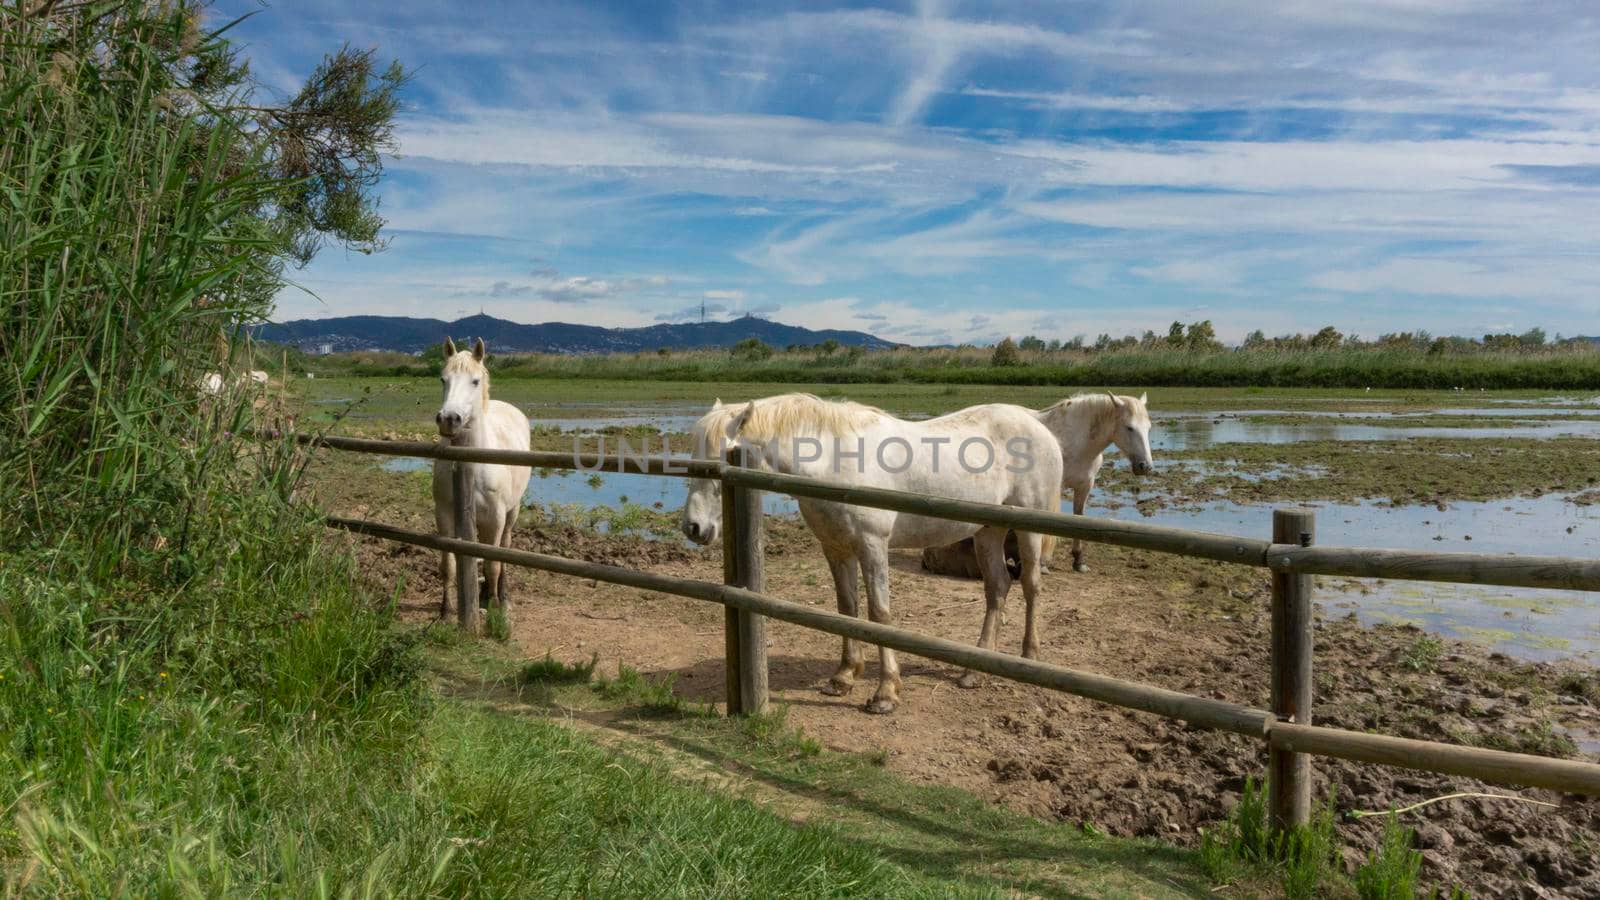 Horse resting behind the fence in a field in Barcelona, Spain.